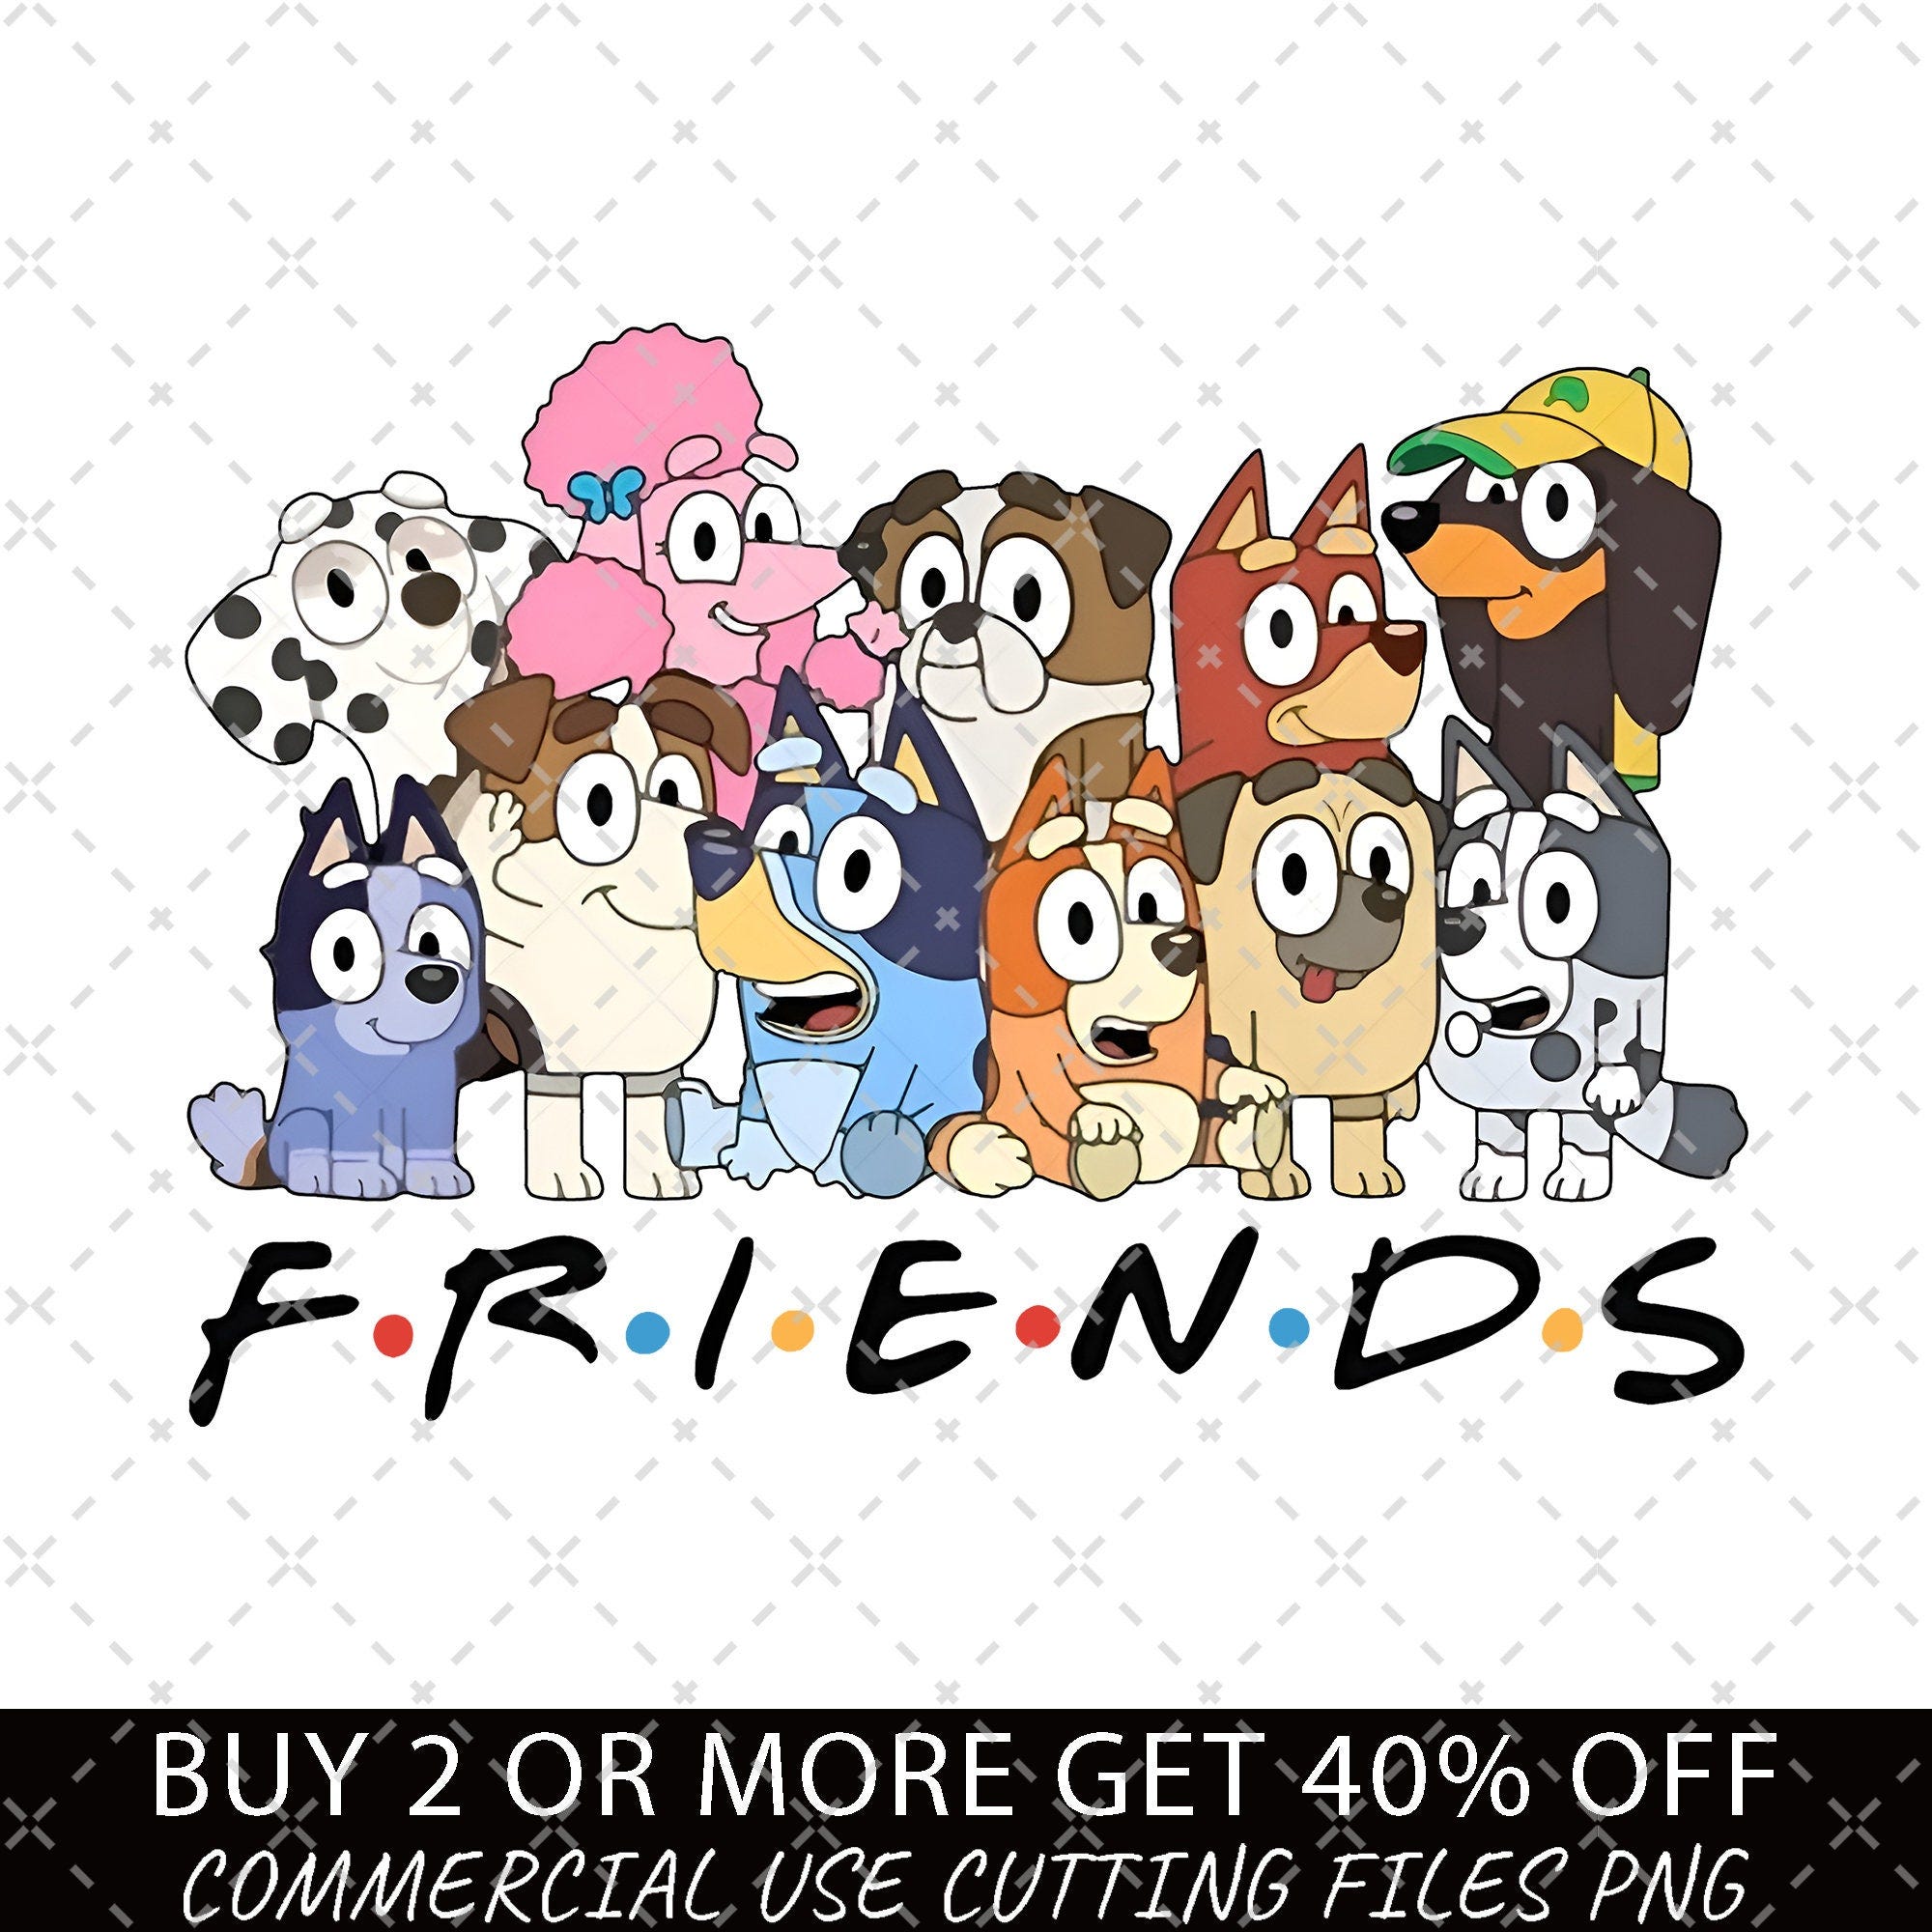 Bluey Friends PNG, Bluey Family PNG, Bluey Png, Bluey Bingo Png, Bluey Mom Png, Bluey Dad Png, Bluey Friends Png, Bluey PNG